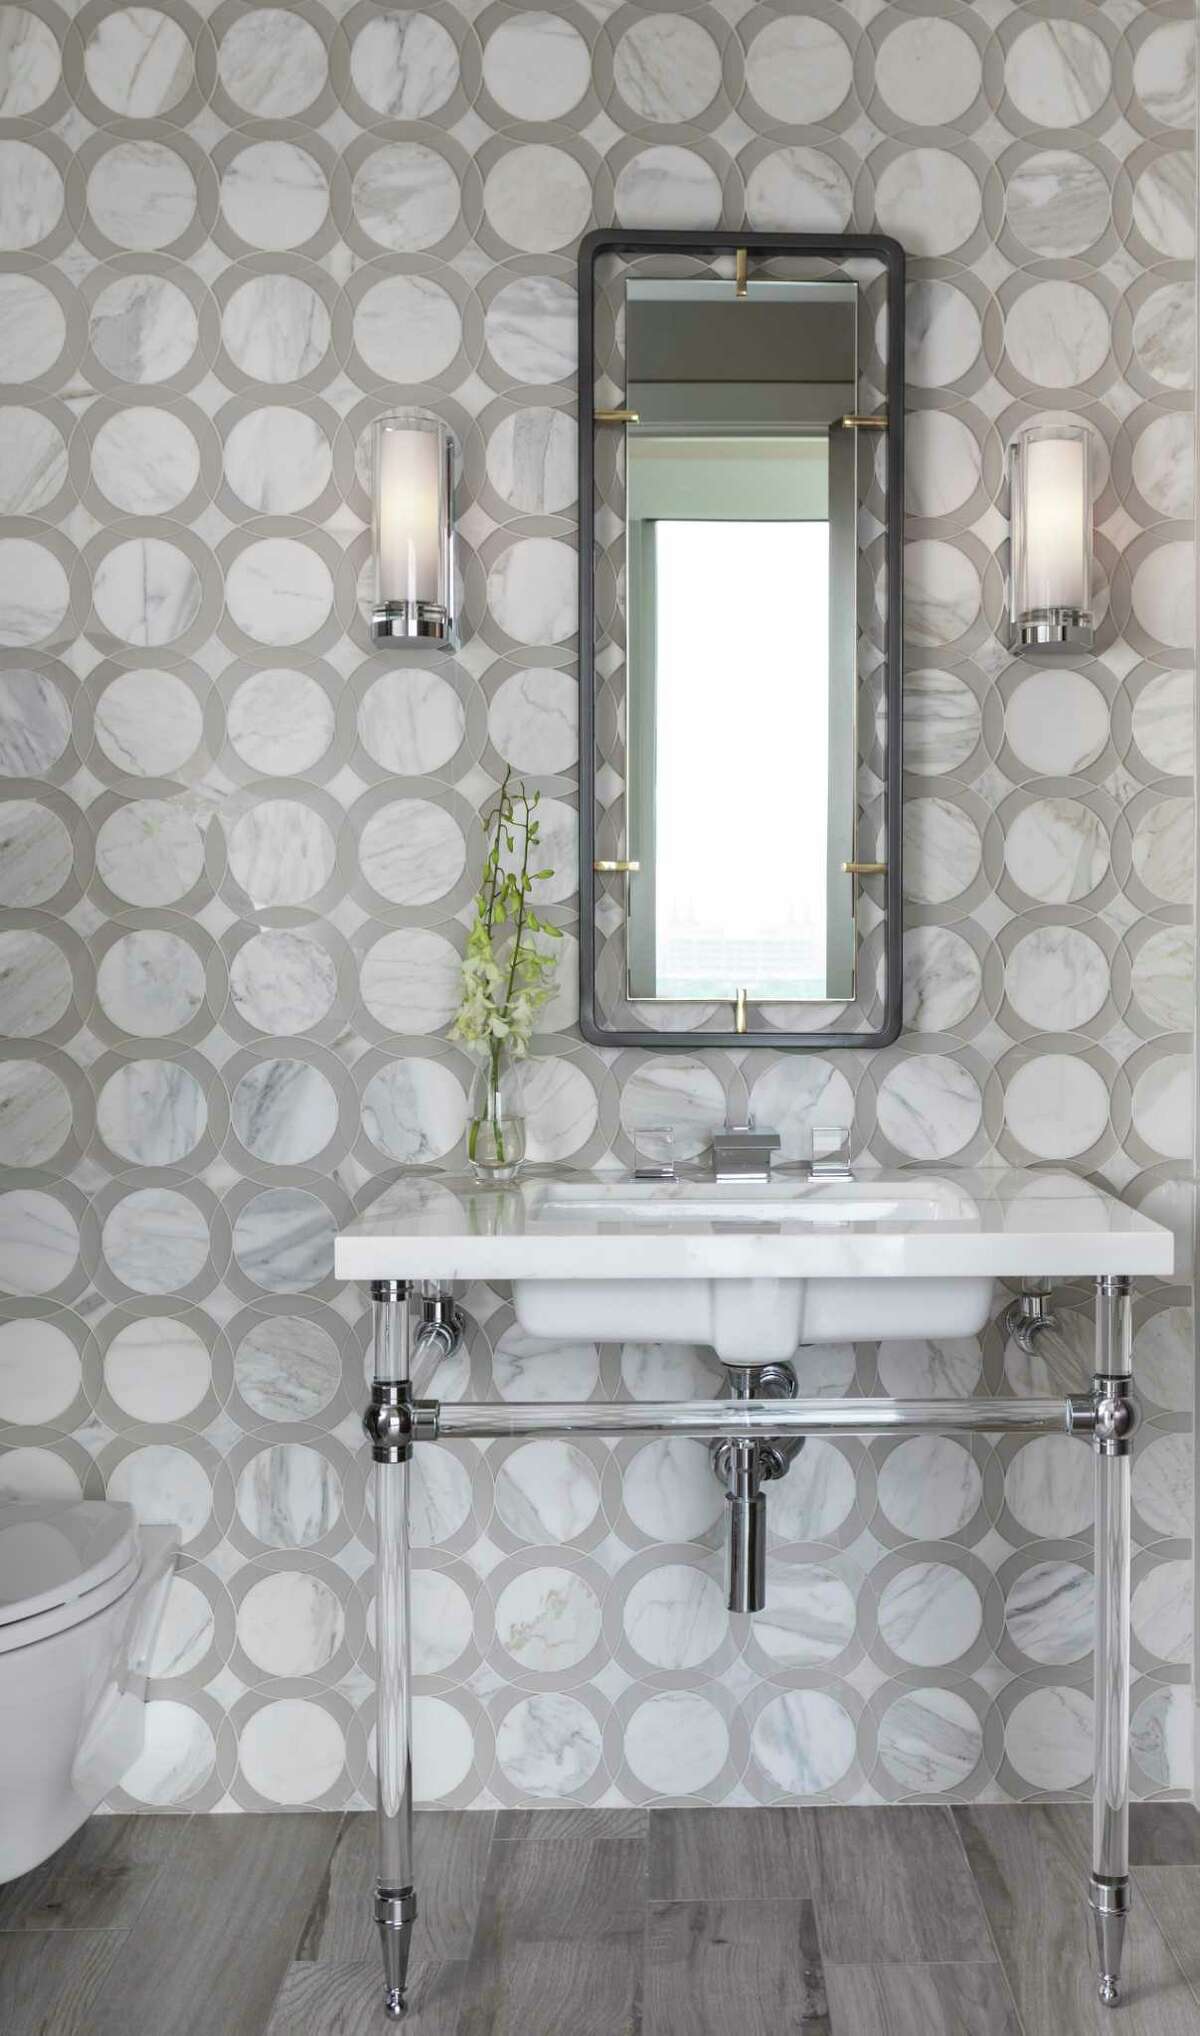 A wall of beautiful marble tile dresses up the powder bathroom.